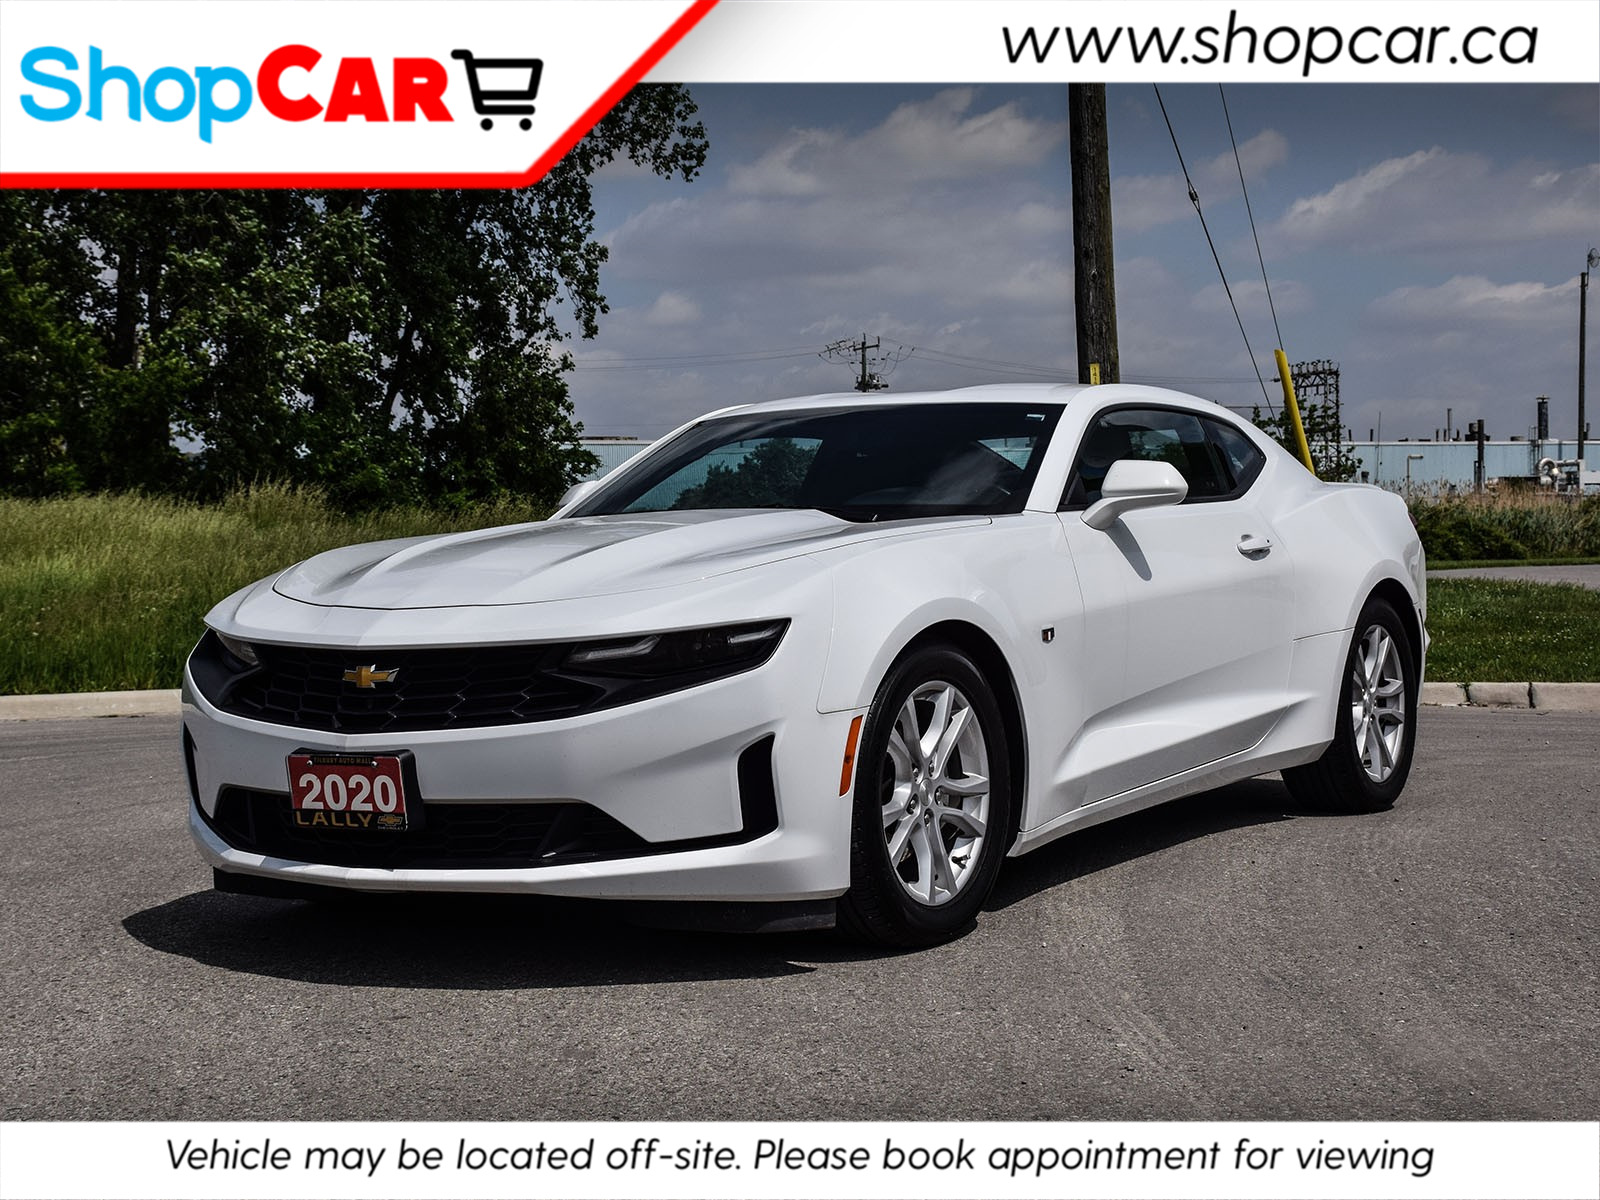 2020 Chevrolet Camaro Price Reduction!  Just in time for Spring!